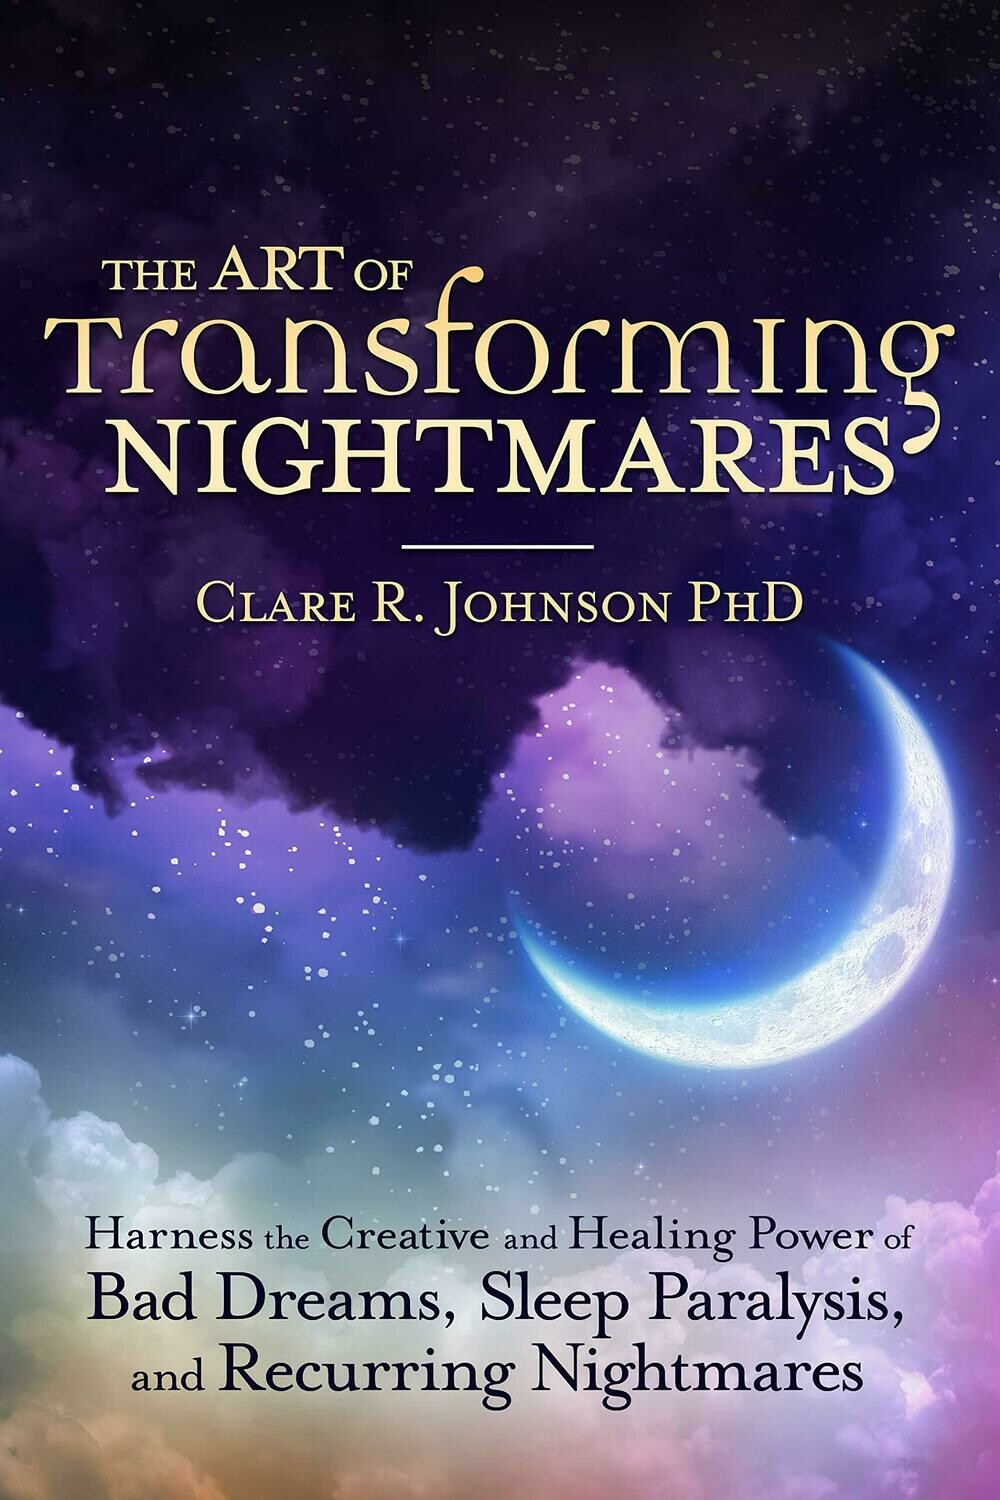 The Art of Transforming Nightmares by Clare R. Johnson PhD